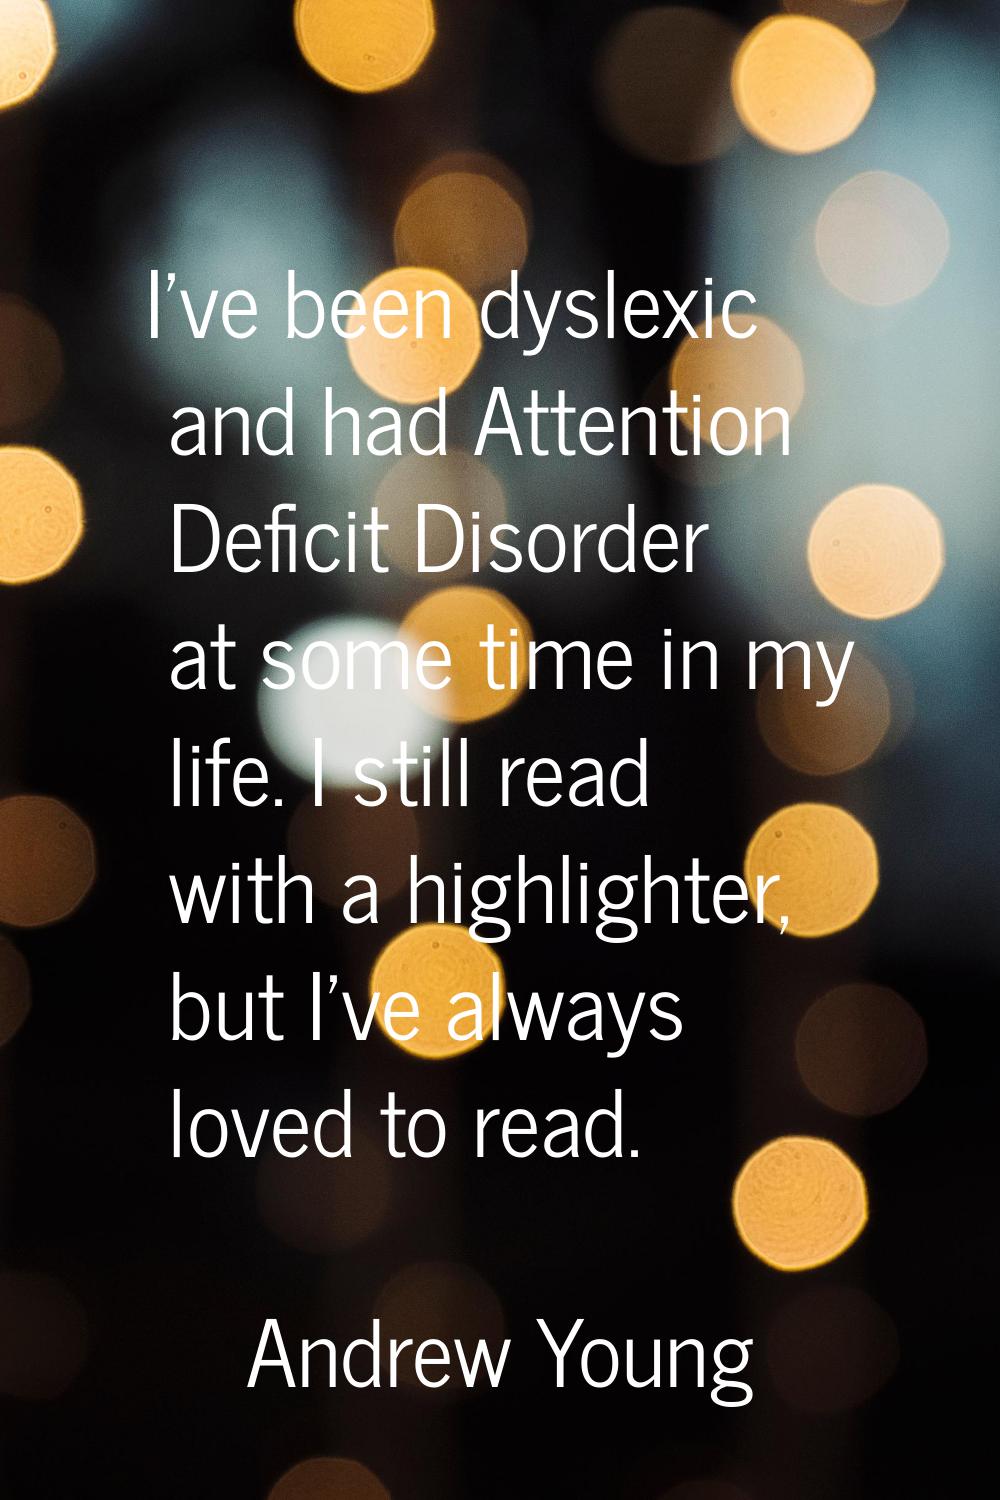 I've been dyslexic and had Attention Deficit Disorder at some time in my life. I still read with a 